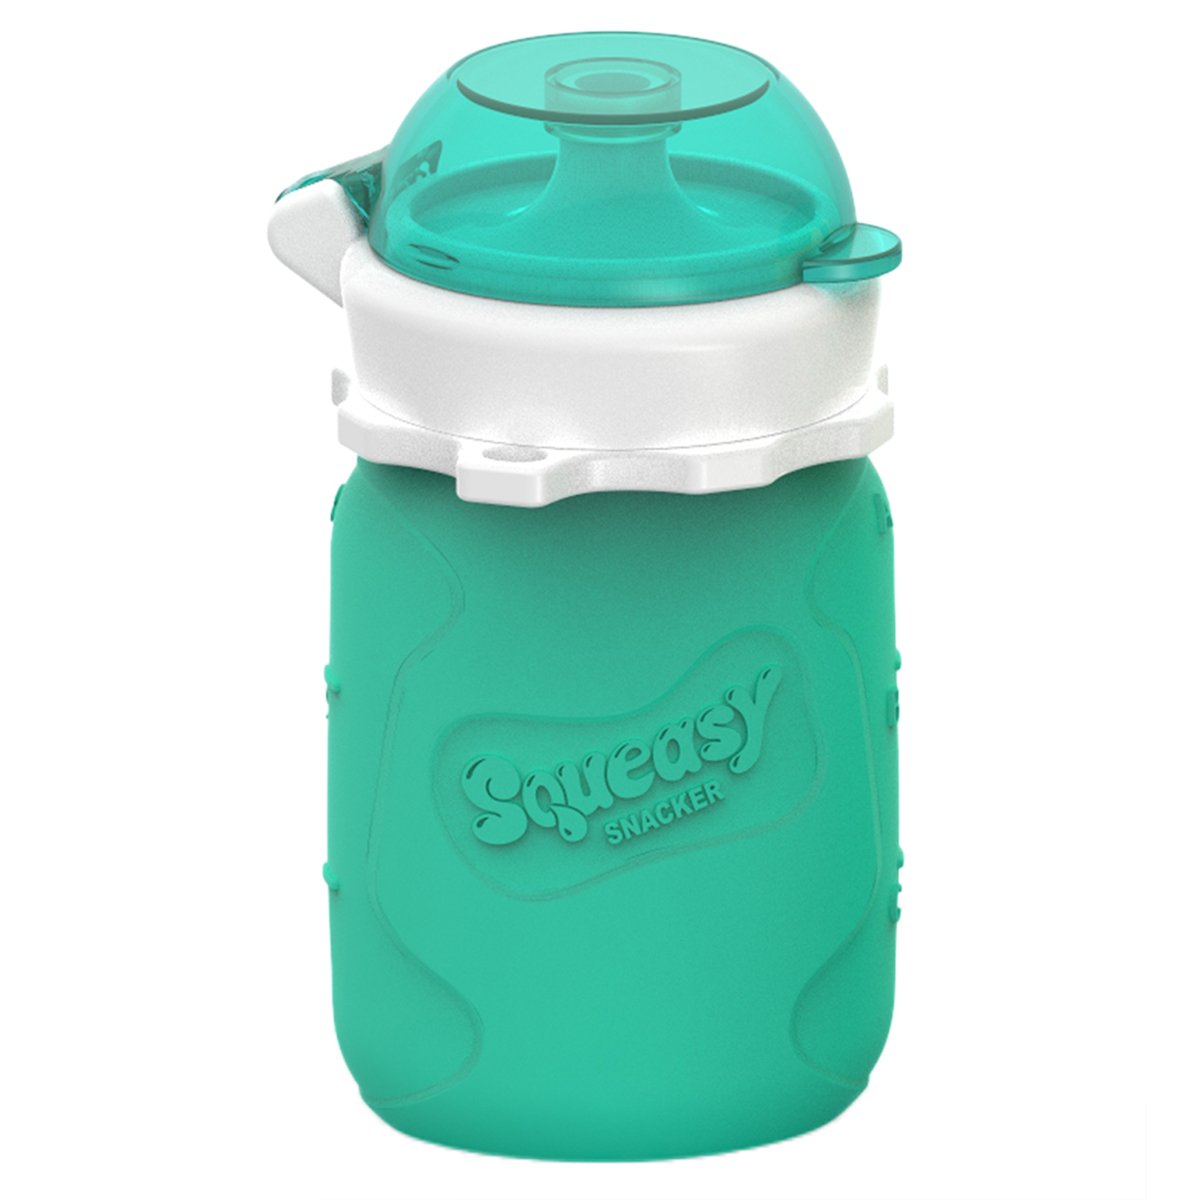 Squeasy Snacker Silicone Food Pouch (Small/100ml)